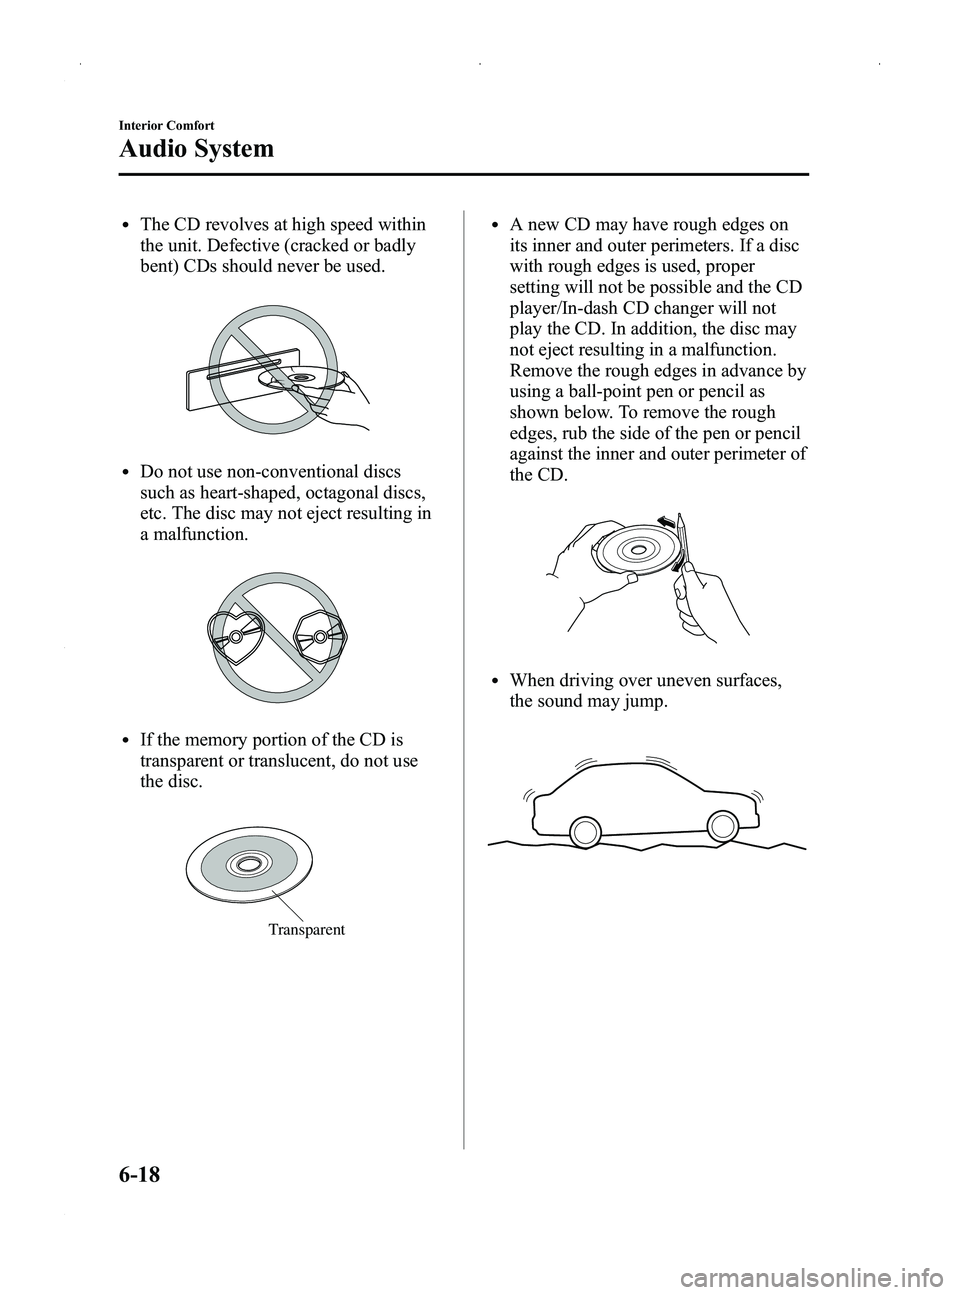 MAZDA MODEL MX-5 MIATA PRHT 2014  Owners Manual Black plate (232,1)
lThe CD revolves at high speed within
the unit. Defective (cracked or badly
bent) CDs should never be used.
lDo not use non-conventional discs
such as heart-shaped, octagonal discs